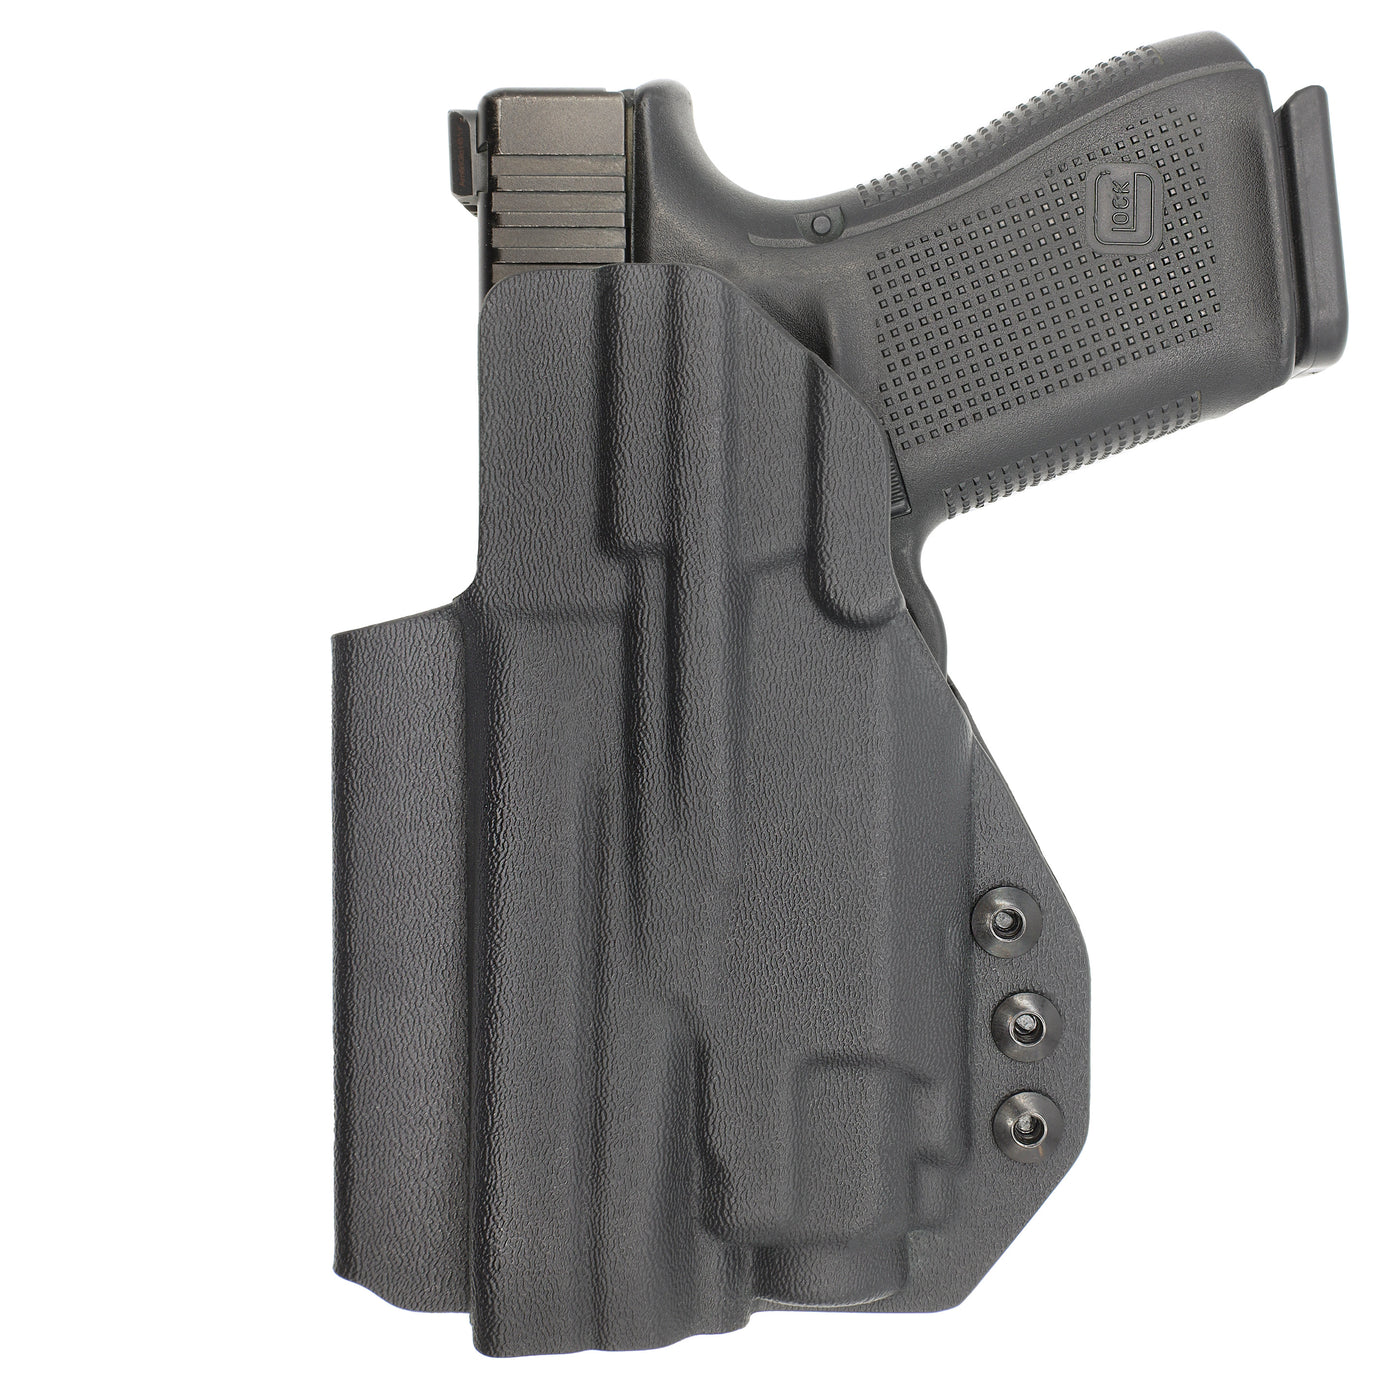 C&G Holsters quickship IWB Tactical Glock 21 streamlight TLR8 holstered back view